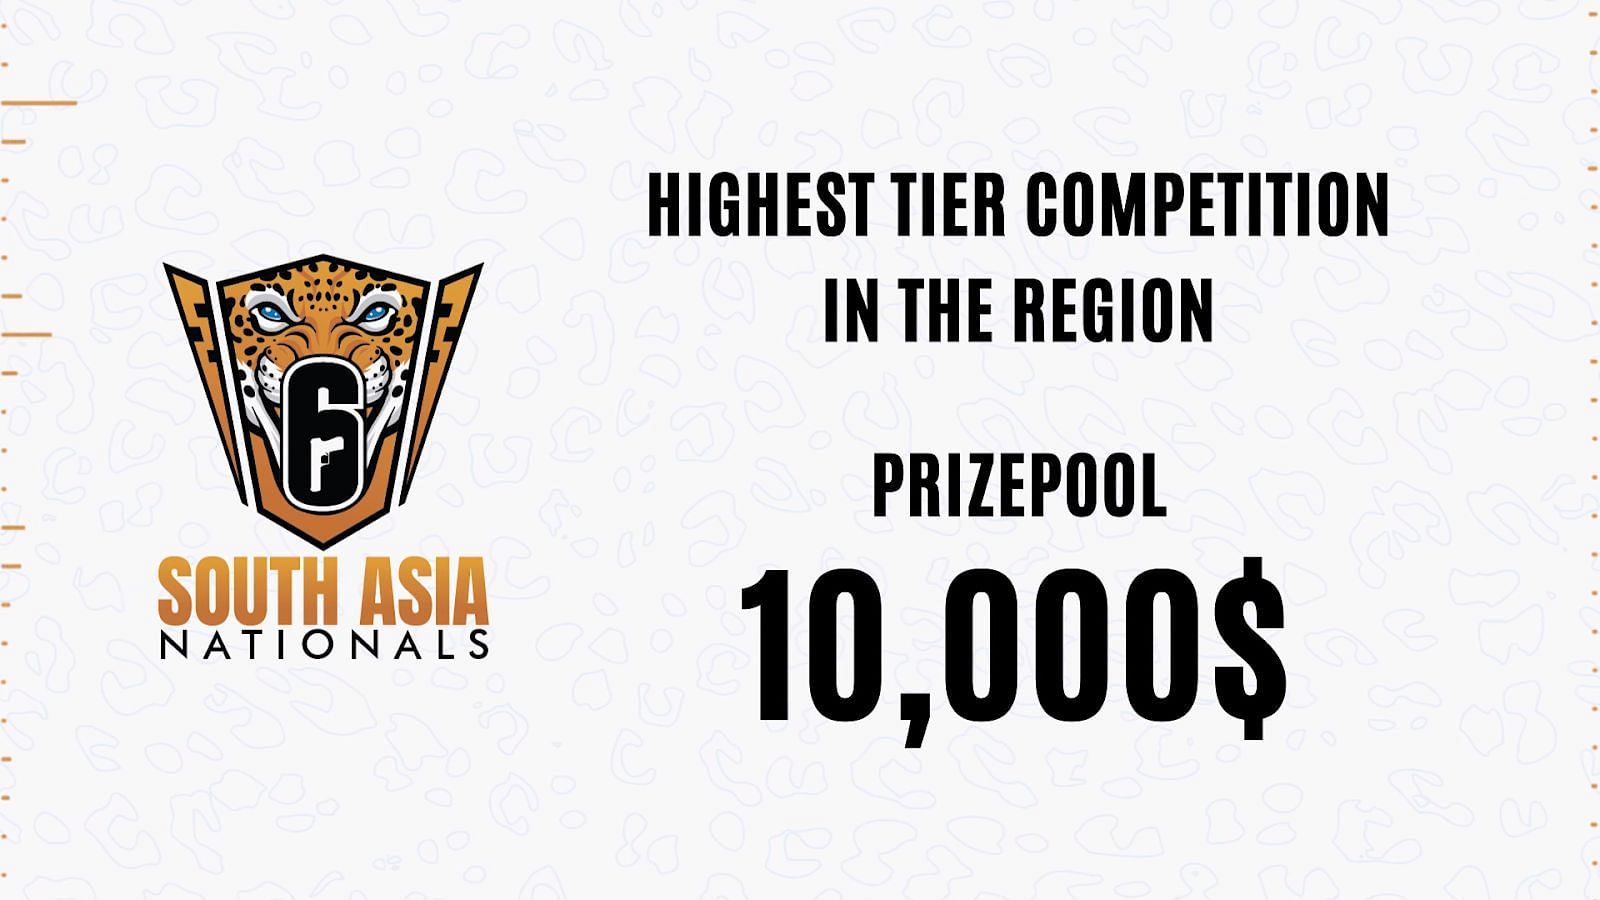 The South Asia Nationals will have a prize pool of $10,000 (Image via The Esports Club)